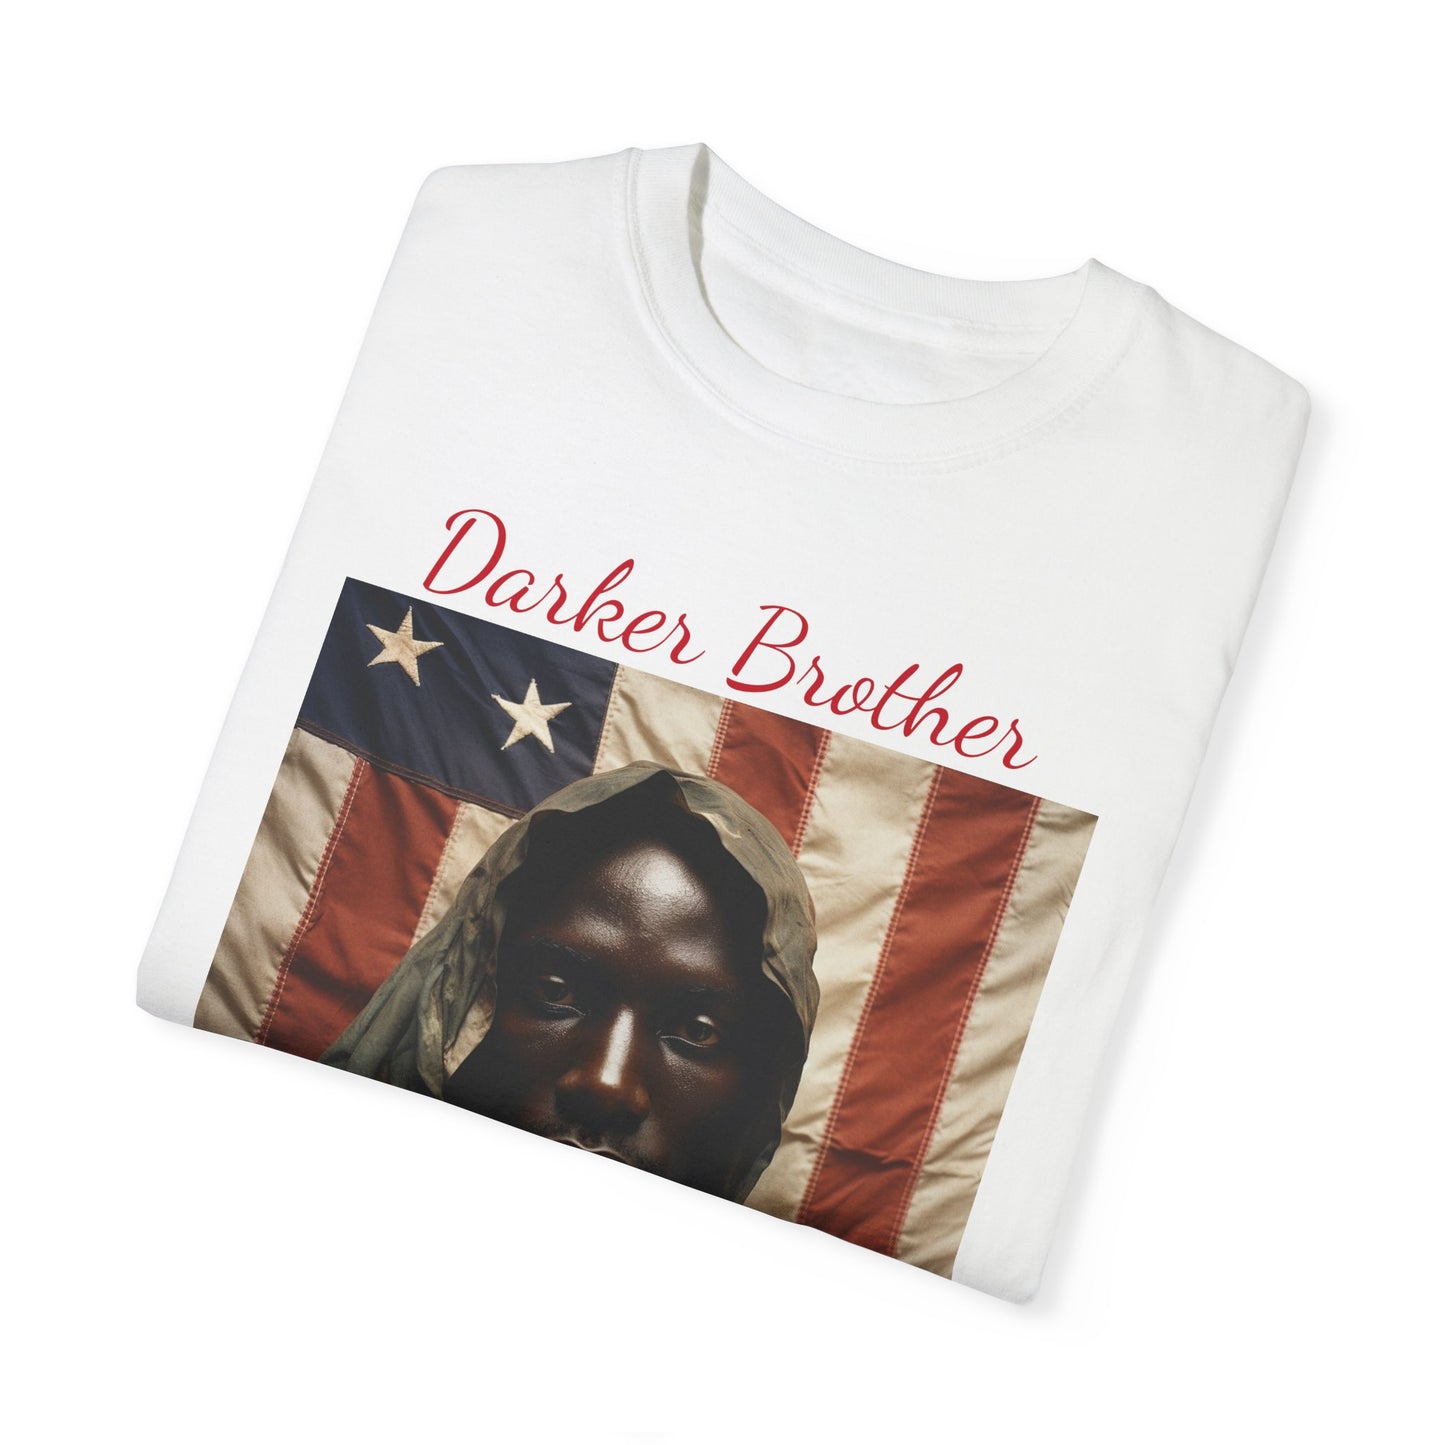 The Darker Brother: Unisex Garment-Dyed T-shirt